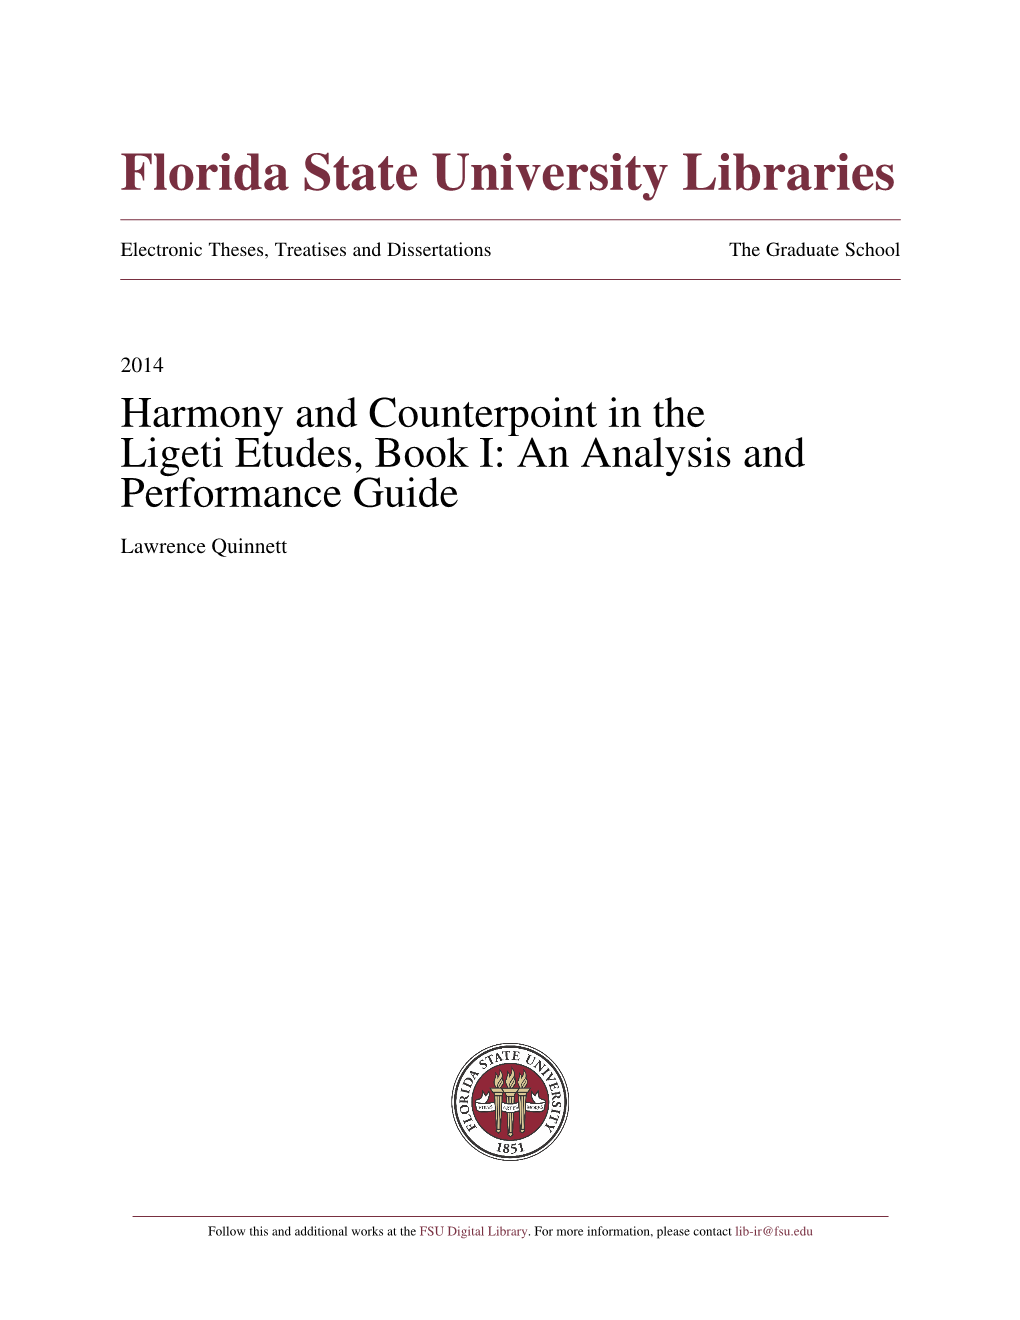 Harmony and Counterpoint in the Ligeti Etudes, Book I: an Analysis and Performance Guide Lawrence Quinnett